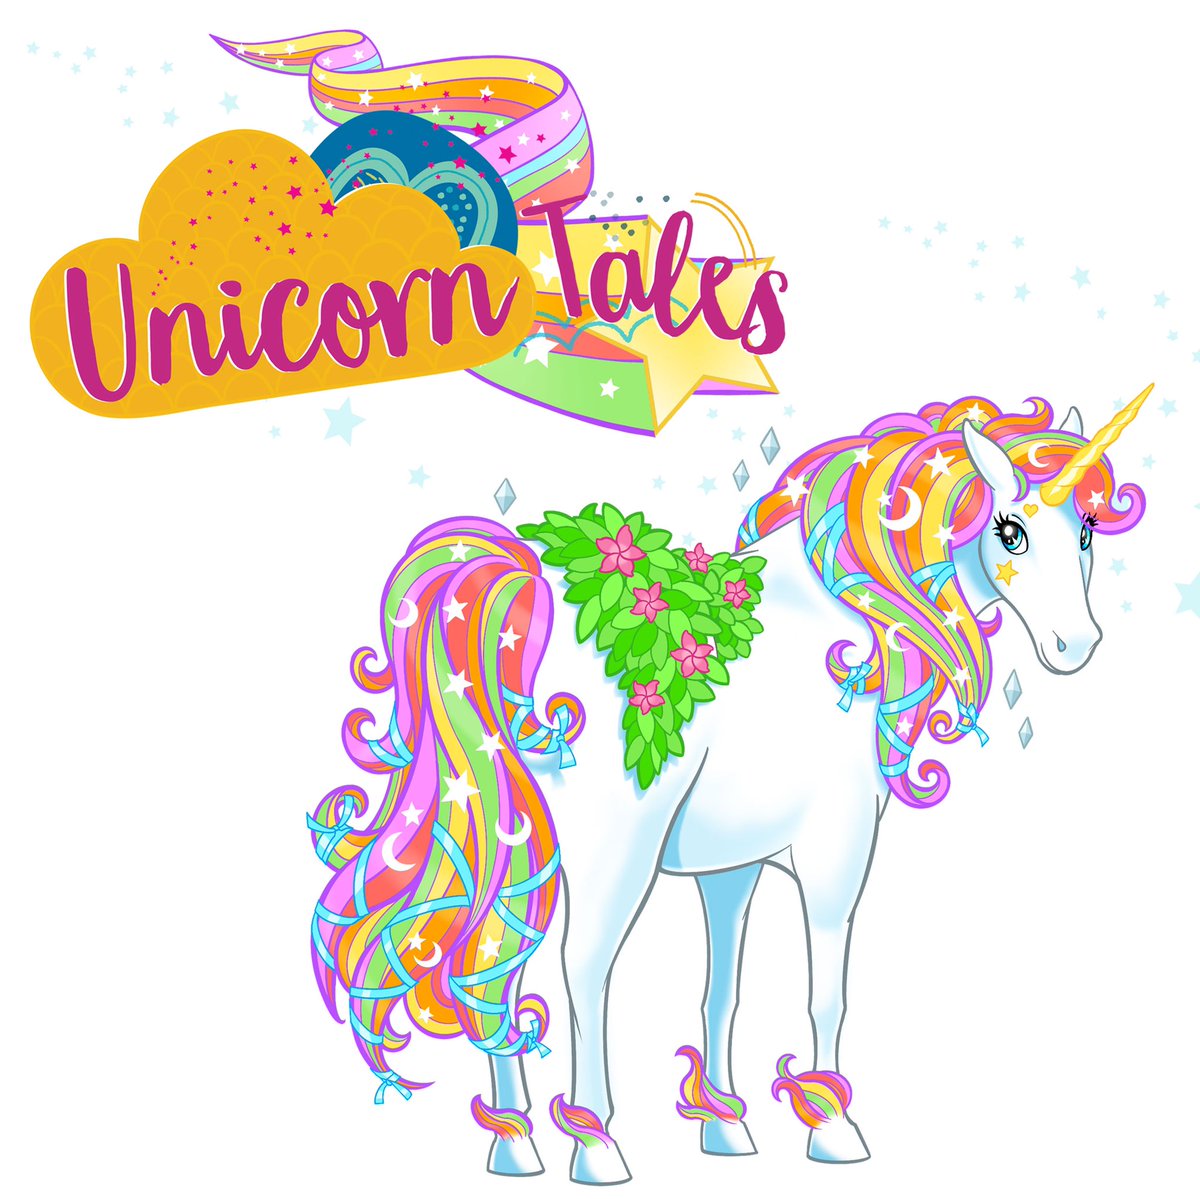 Our new #blog is now live! All about encouraging creativity with #unicorns and #mythicalcreatures, read about our long term fascination with these mythical beasts and learn some fun facts!